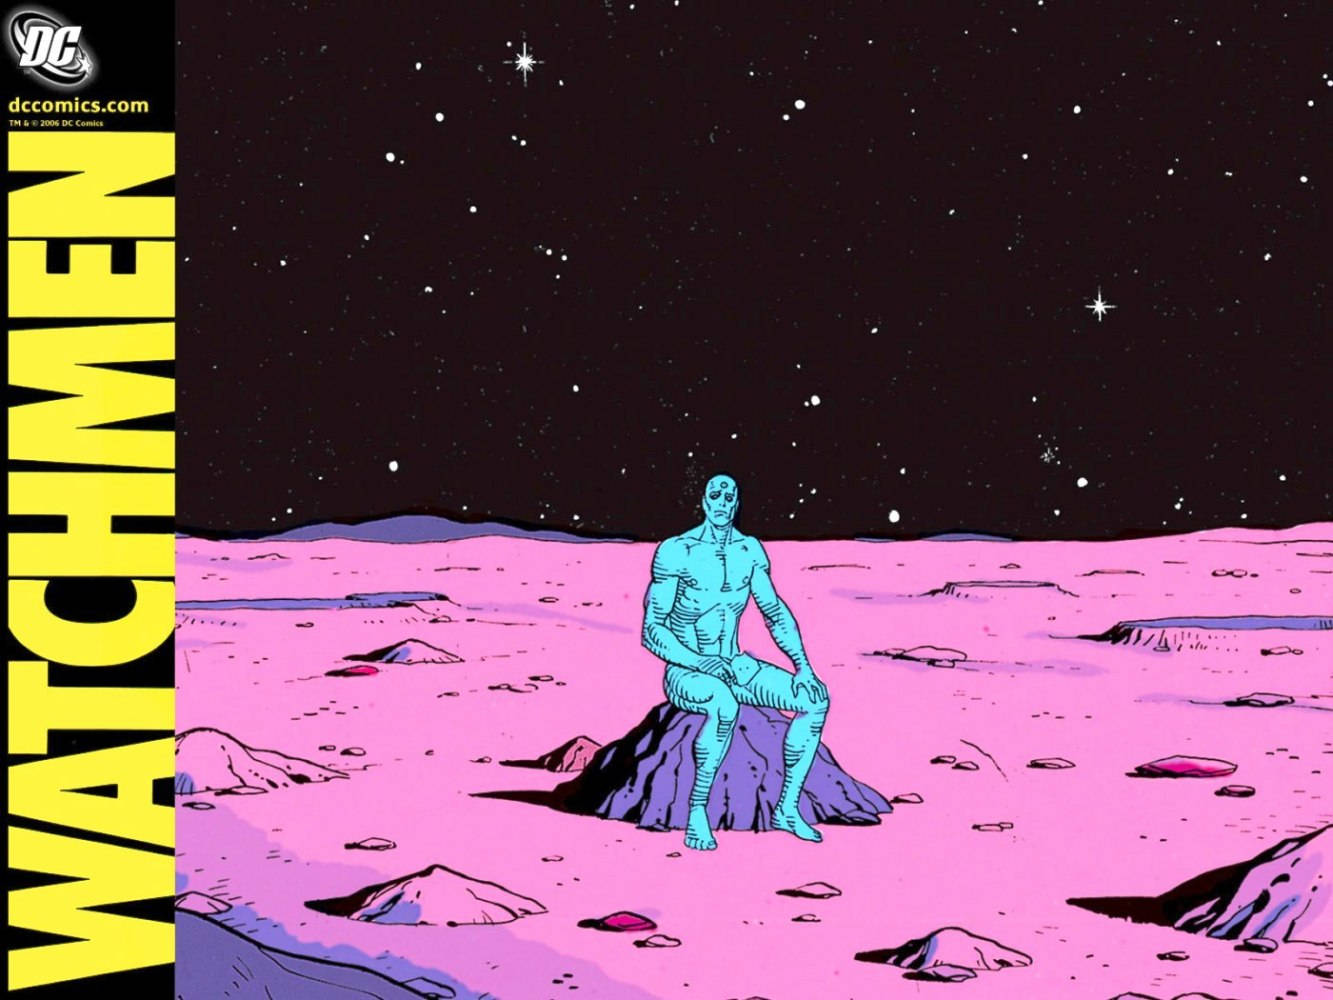 Enigmatic Dr. Manhattan From Watchmen, Illuminating The Shadows. Background